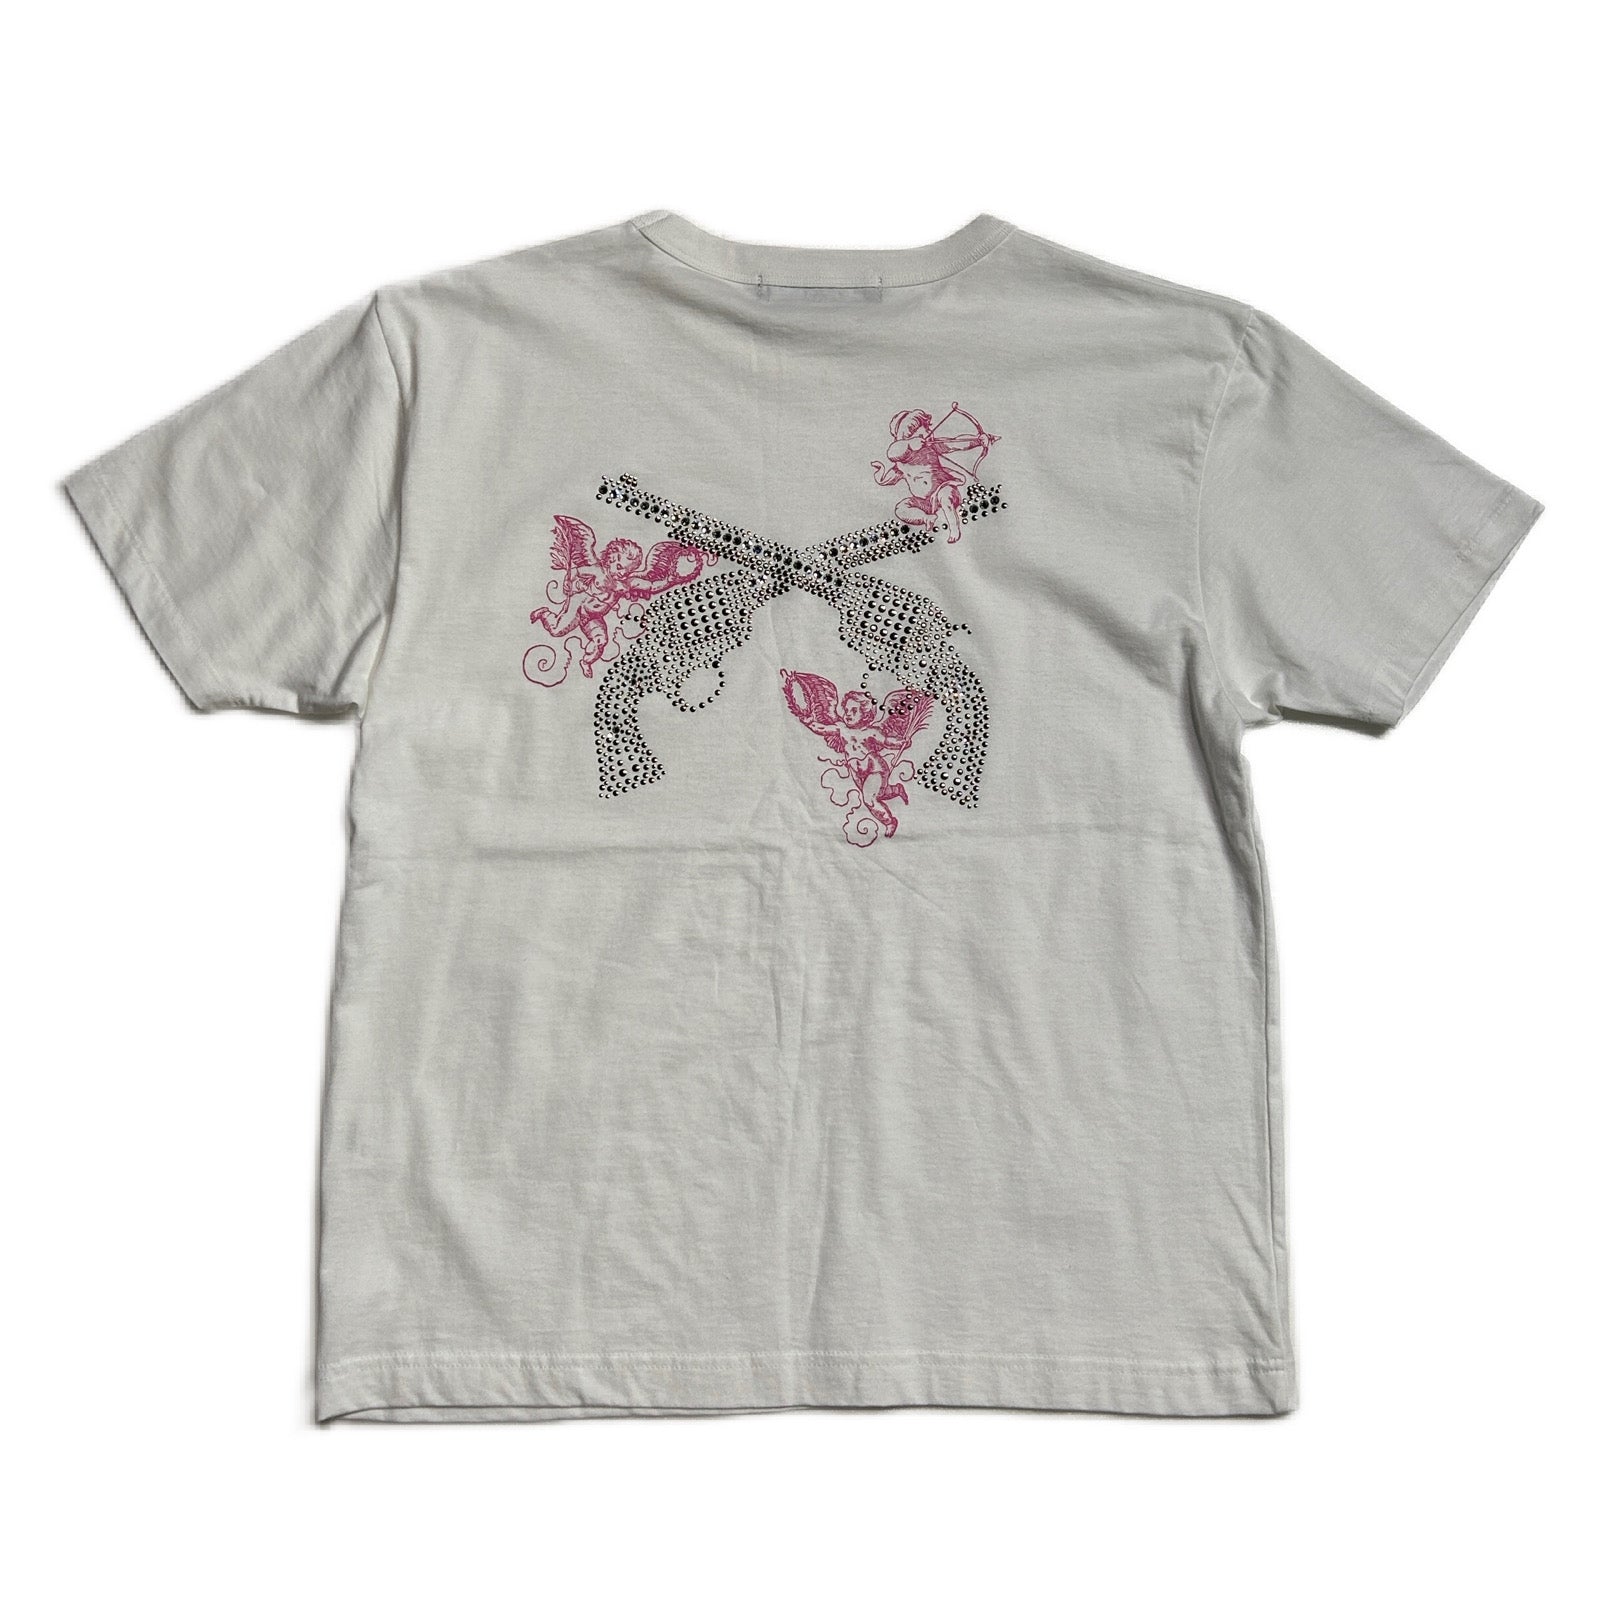 Load image into Gallery viewer, WOMEN ANGEL BACK PRINT CROSSGUN T / WHITE